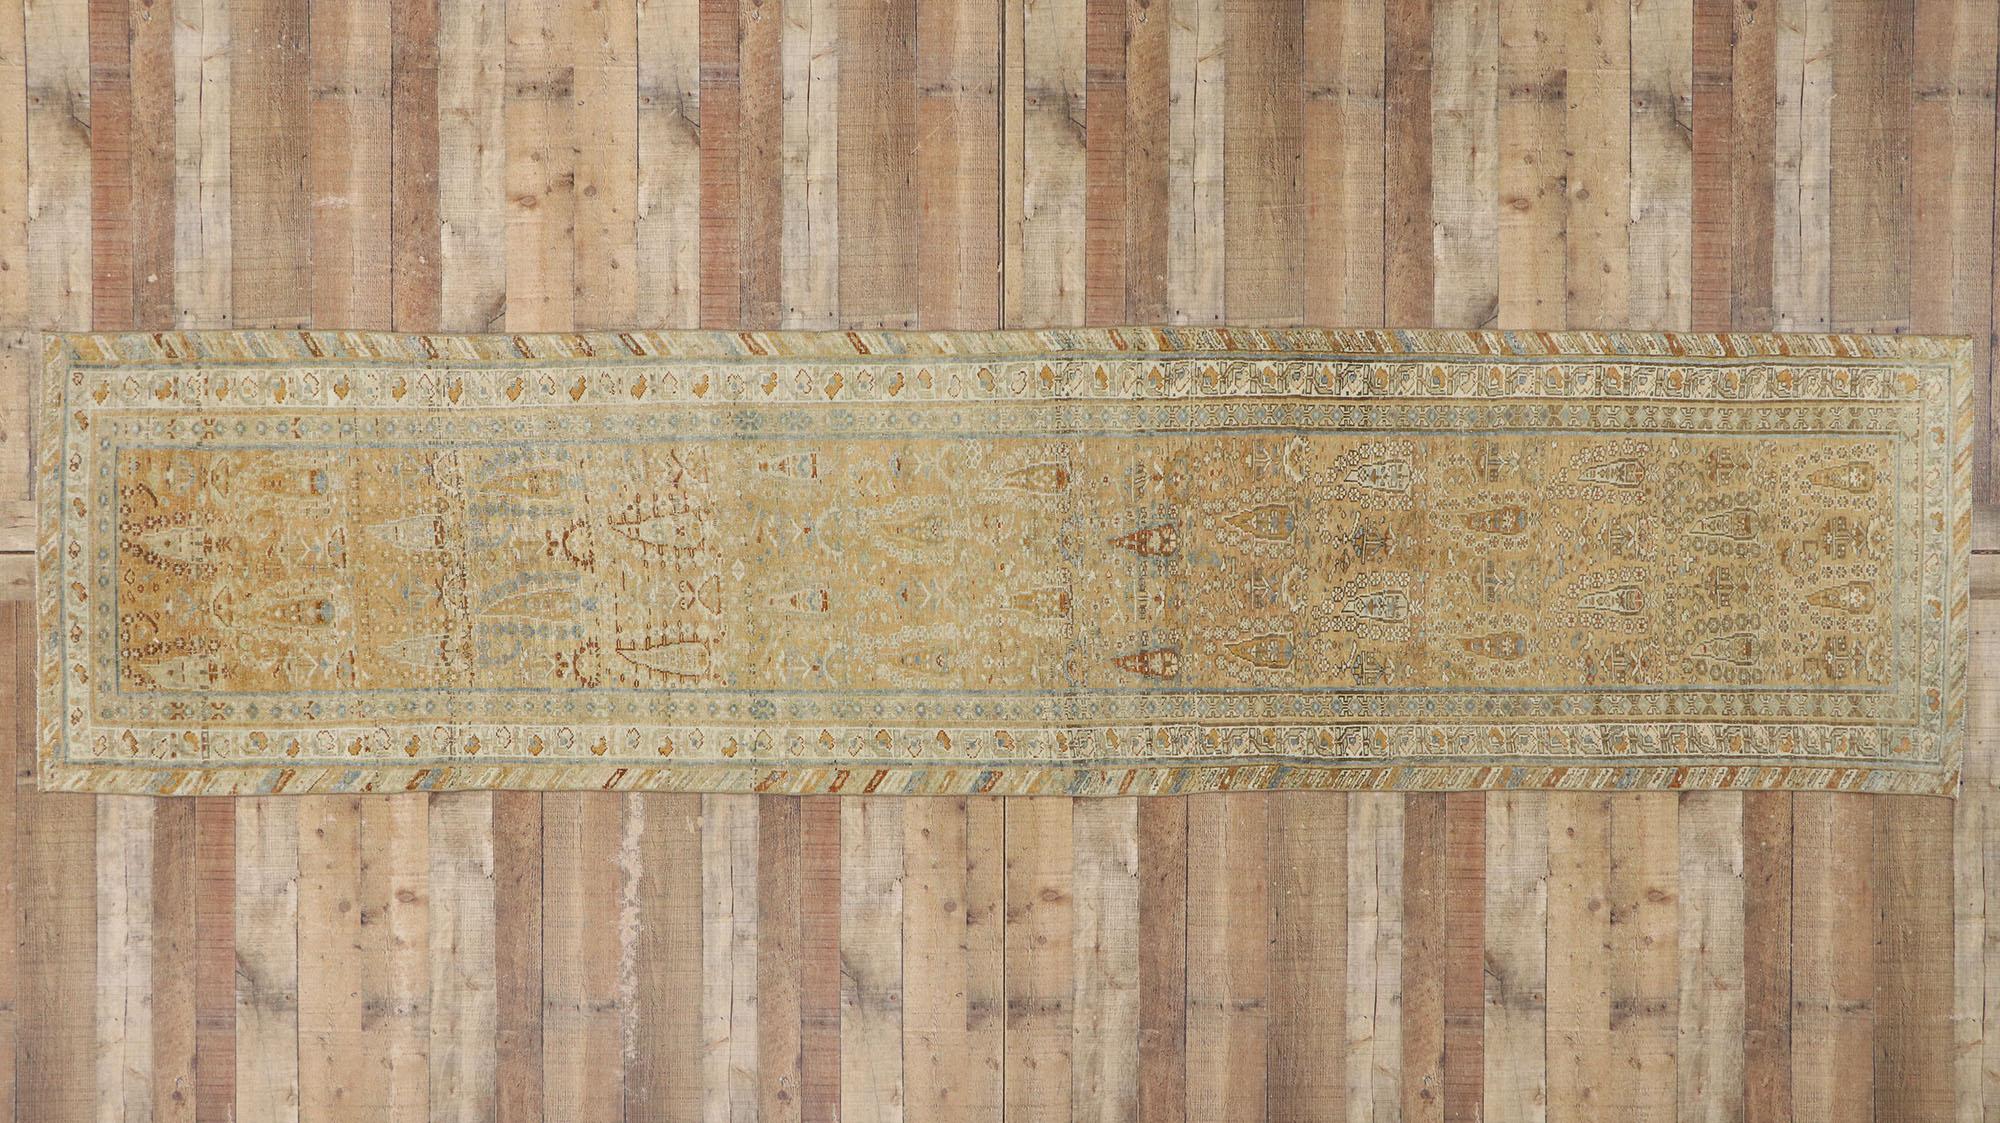 53253, antique Persian Bakhtiari Cypress Tree Runner with British Colonial style. With a subdued appearance and cypress tree design in neutral hues, this hand knotted wool antique Persian Bakhtiari runner charms with ease and beautifully embodies